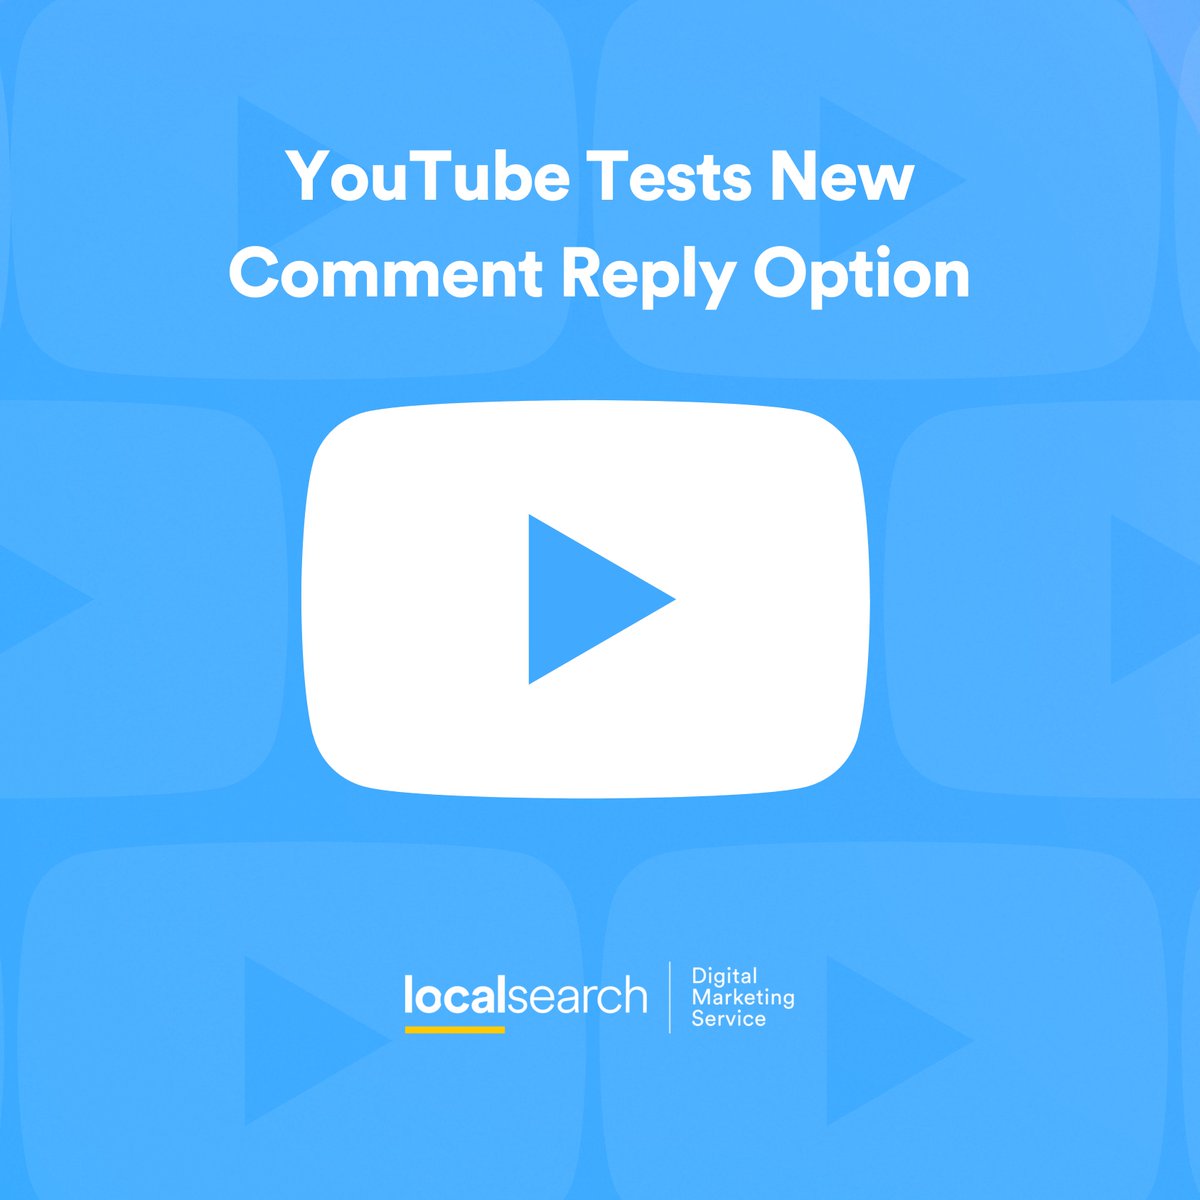 @YouTube has announced it is testing out a new option that will enable Shorts creators to create response videos to comments on other people’s channels.

#DigitalMarketing #YouTubeShorts